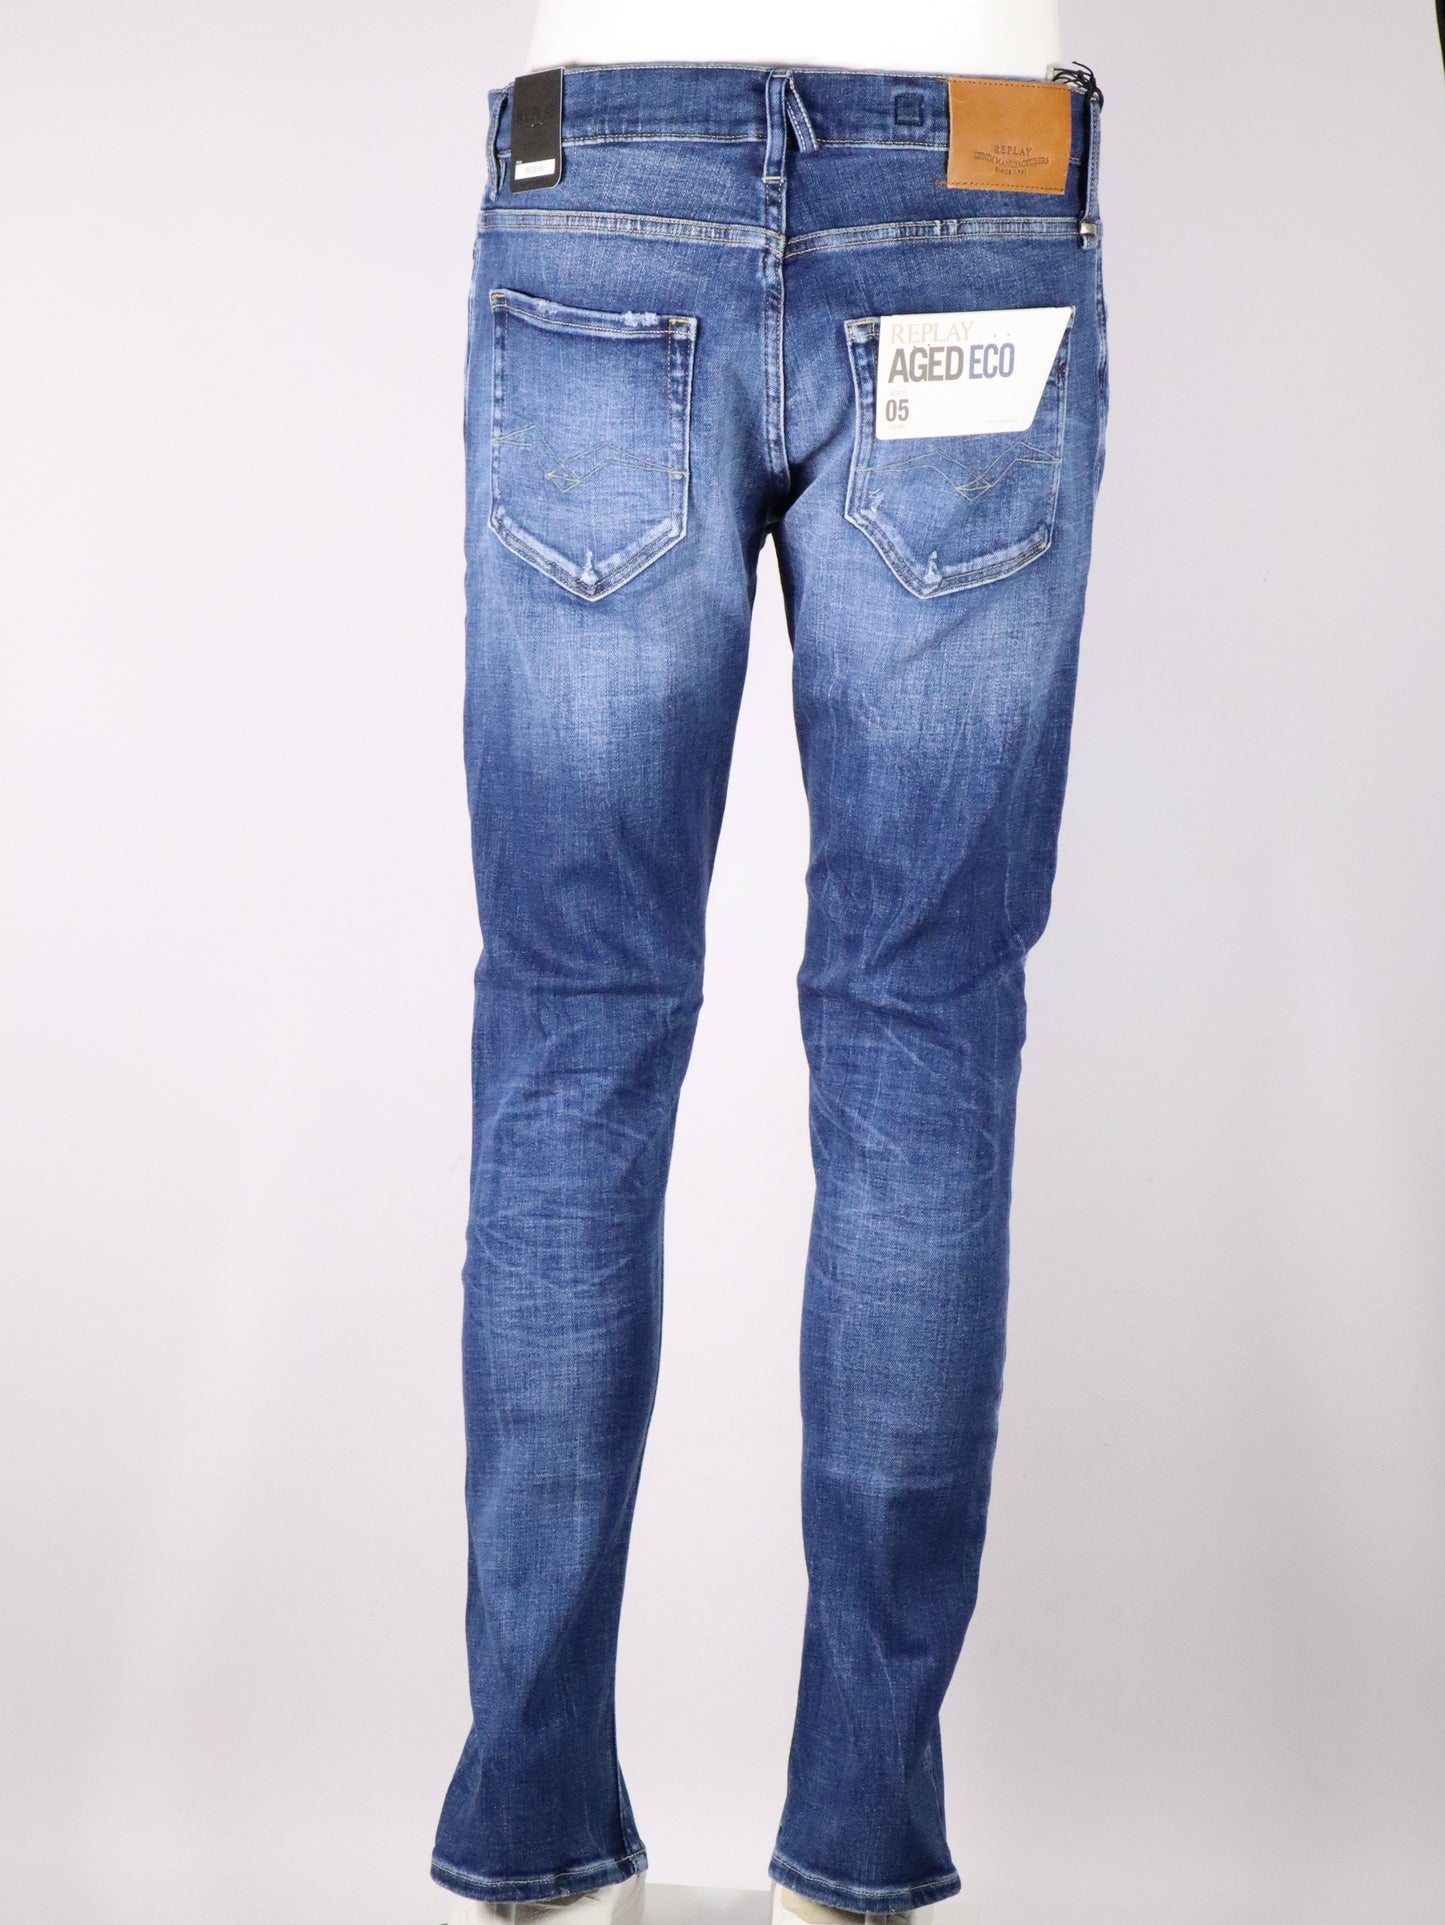 Jeans slim fit aged 5 year REPLAY141414